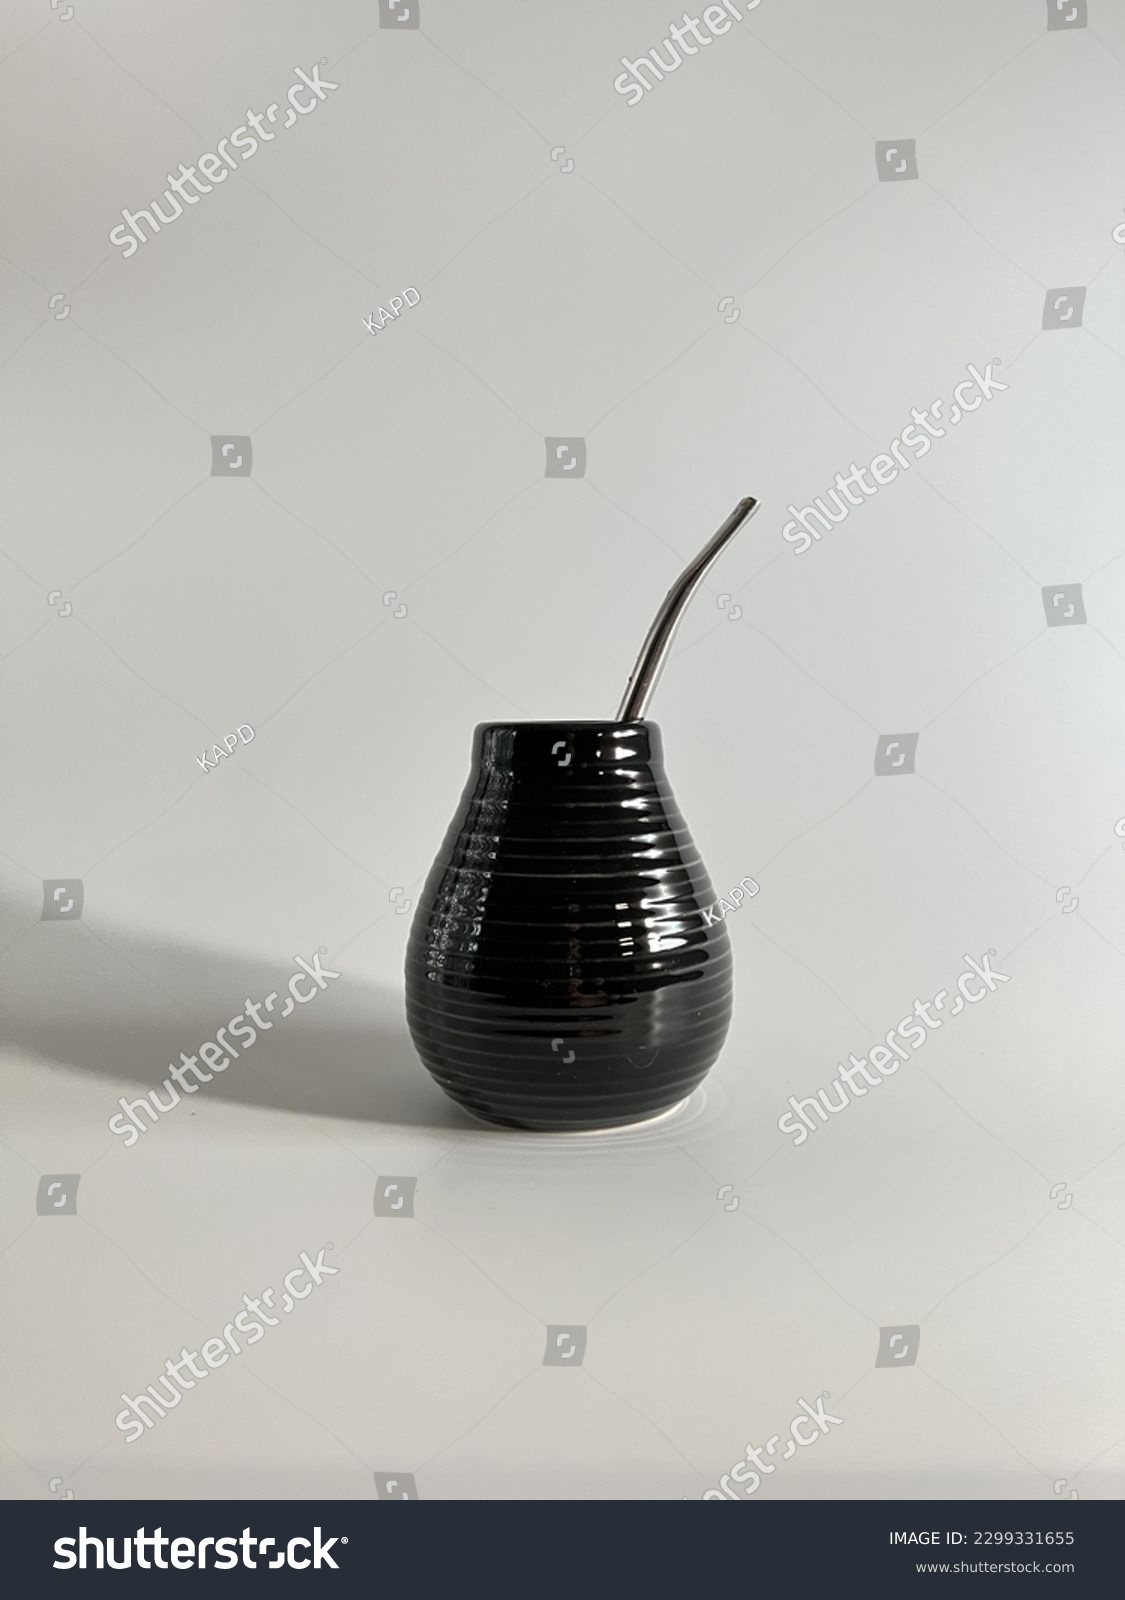 YERBA mat cup with spoon. YERBA, composition, product photography on white background. Healthy and stimulating drink, decoction, tea #2299331655